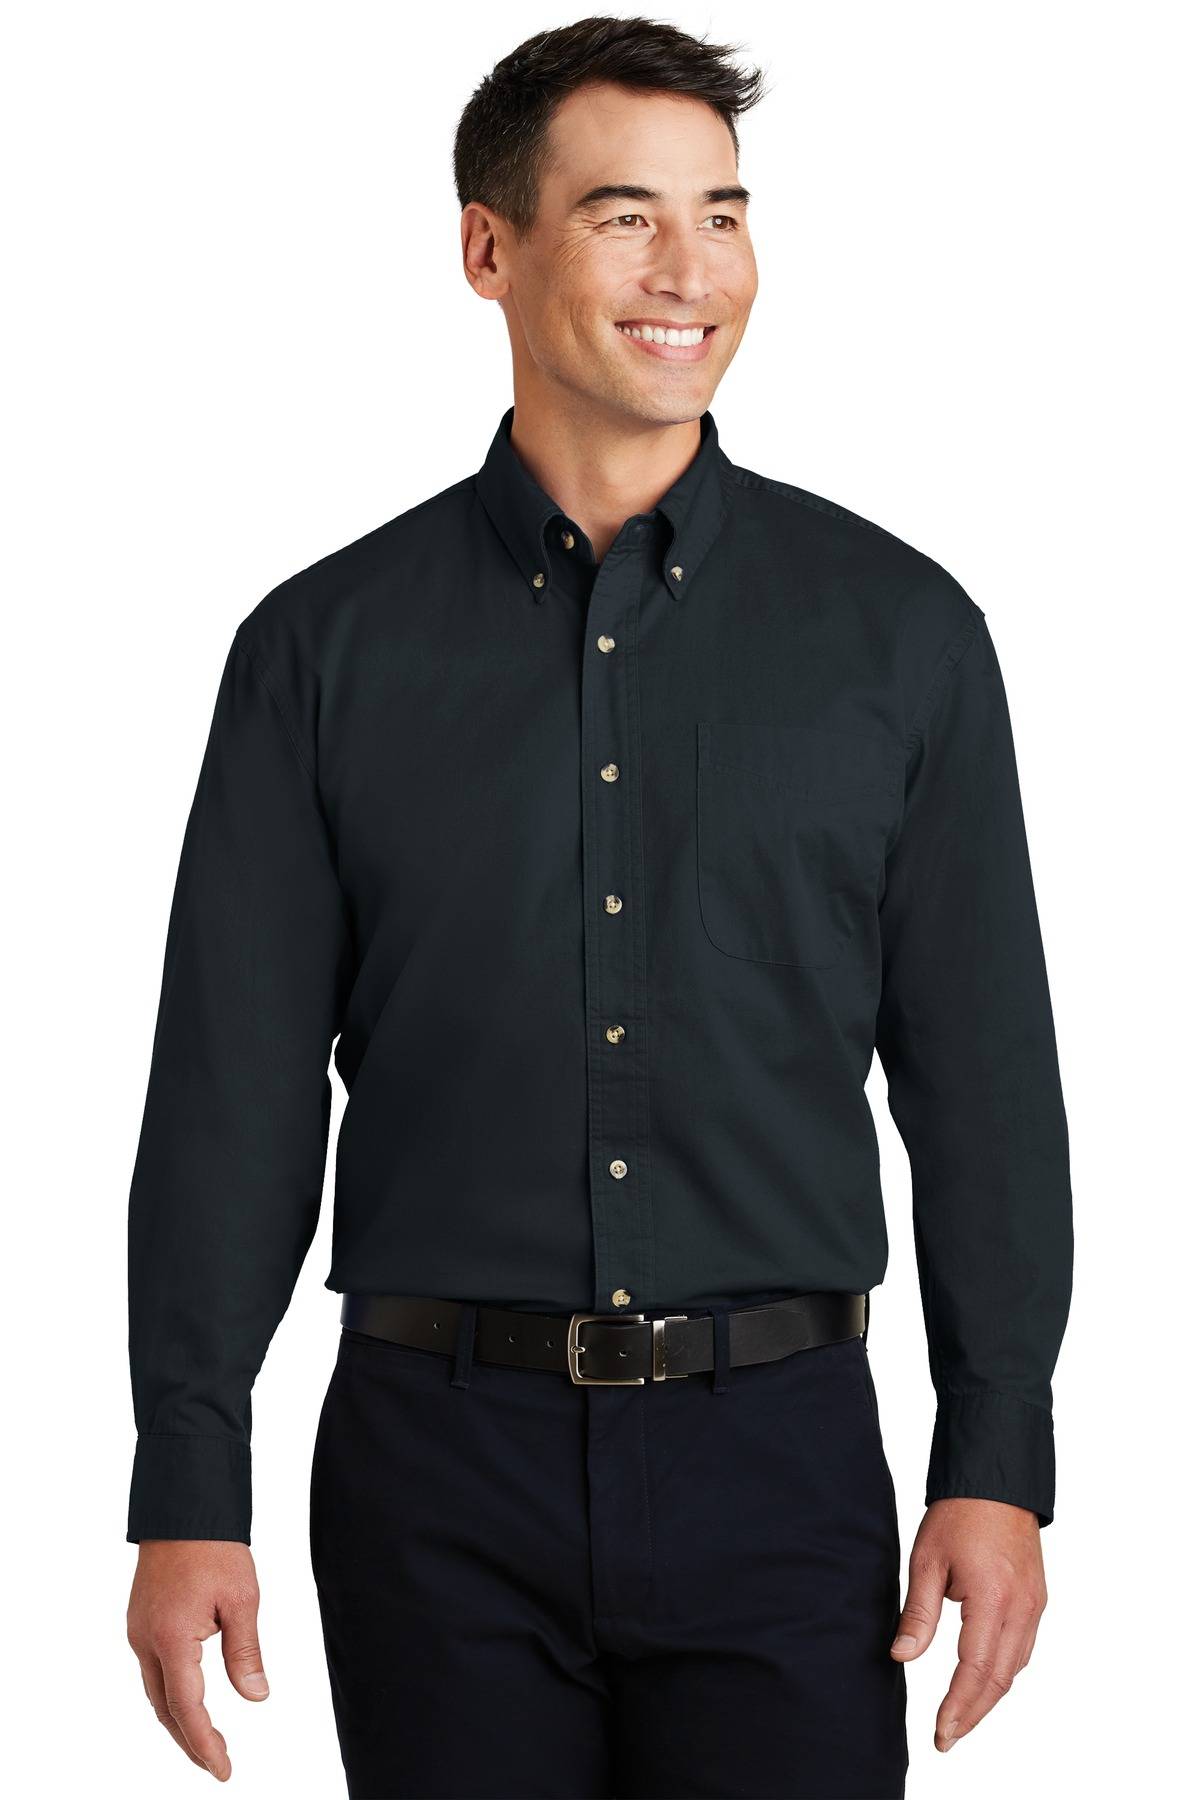 Port Authority S600T Mens Long Sleeve Button Down Easy Care Twill Dress Shirt With Pocket